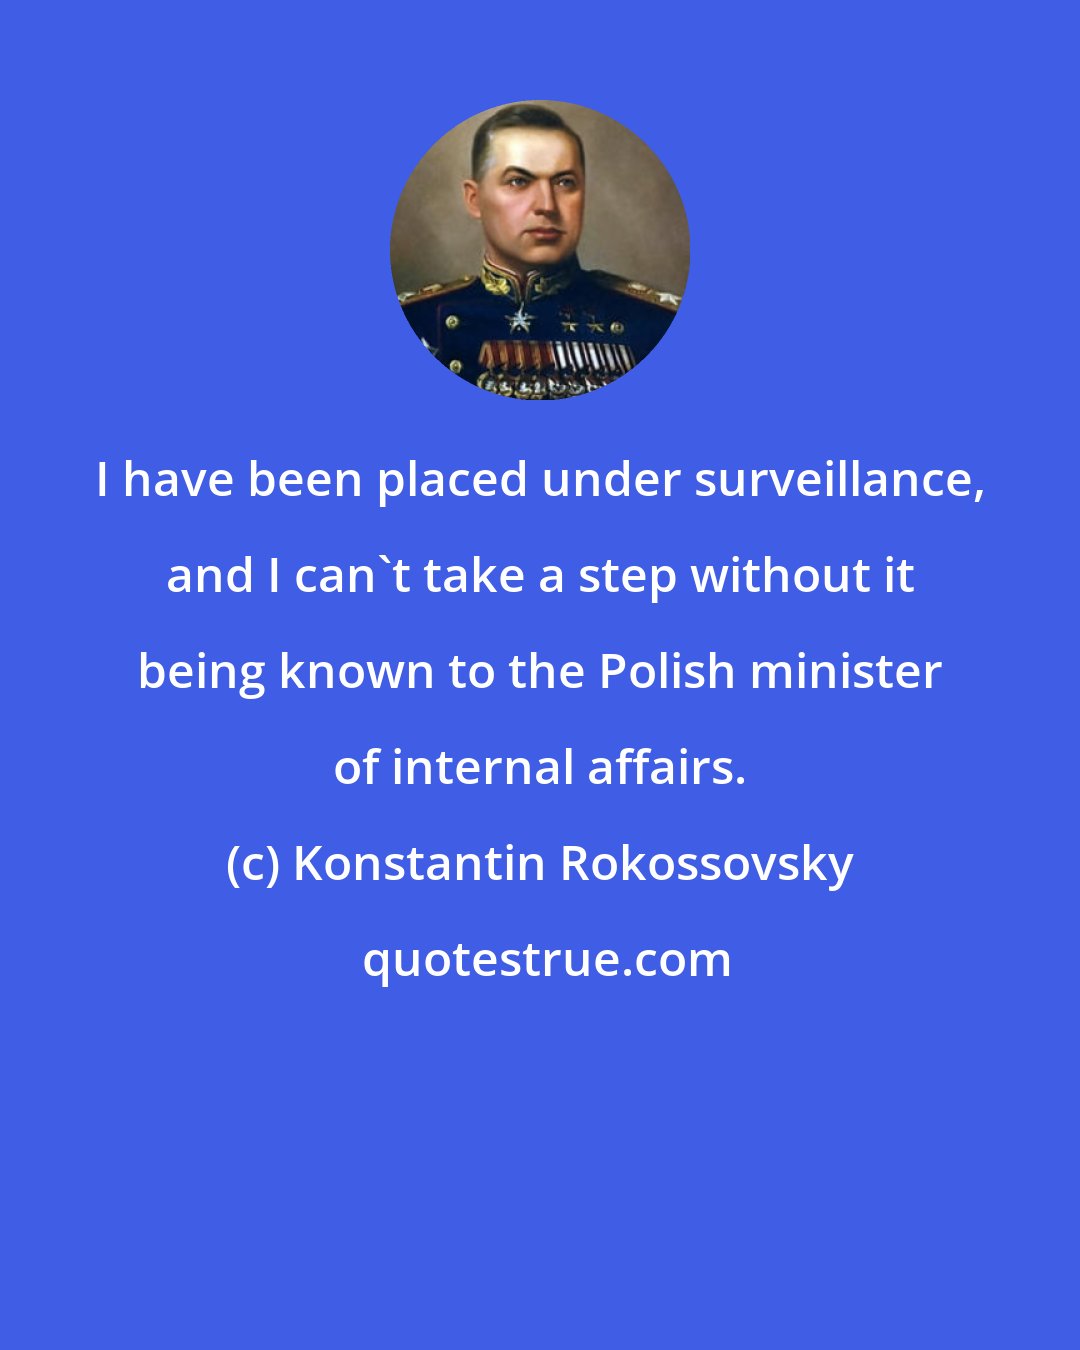 Konstantin Rokossovsky: I have been placed under surveillance, and I can't take a step without it being known to the Polish minister of internal affairs.